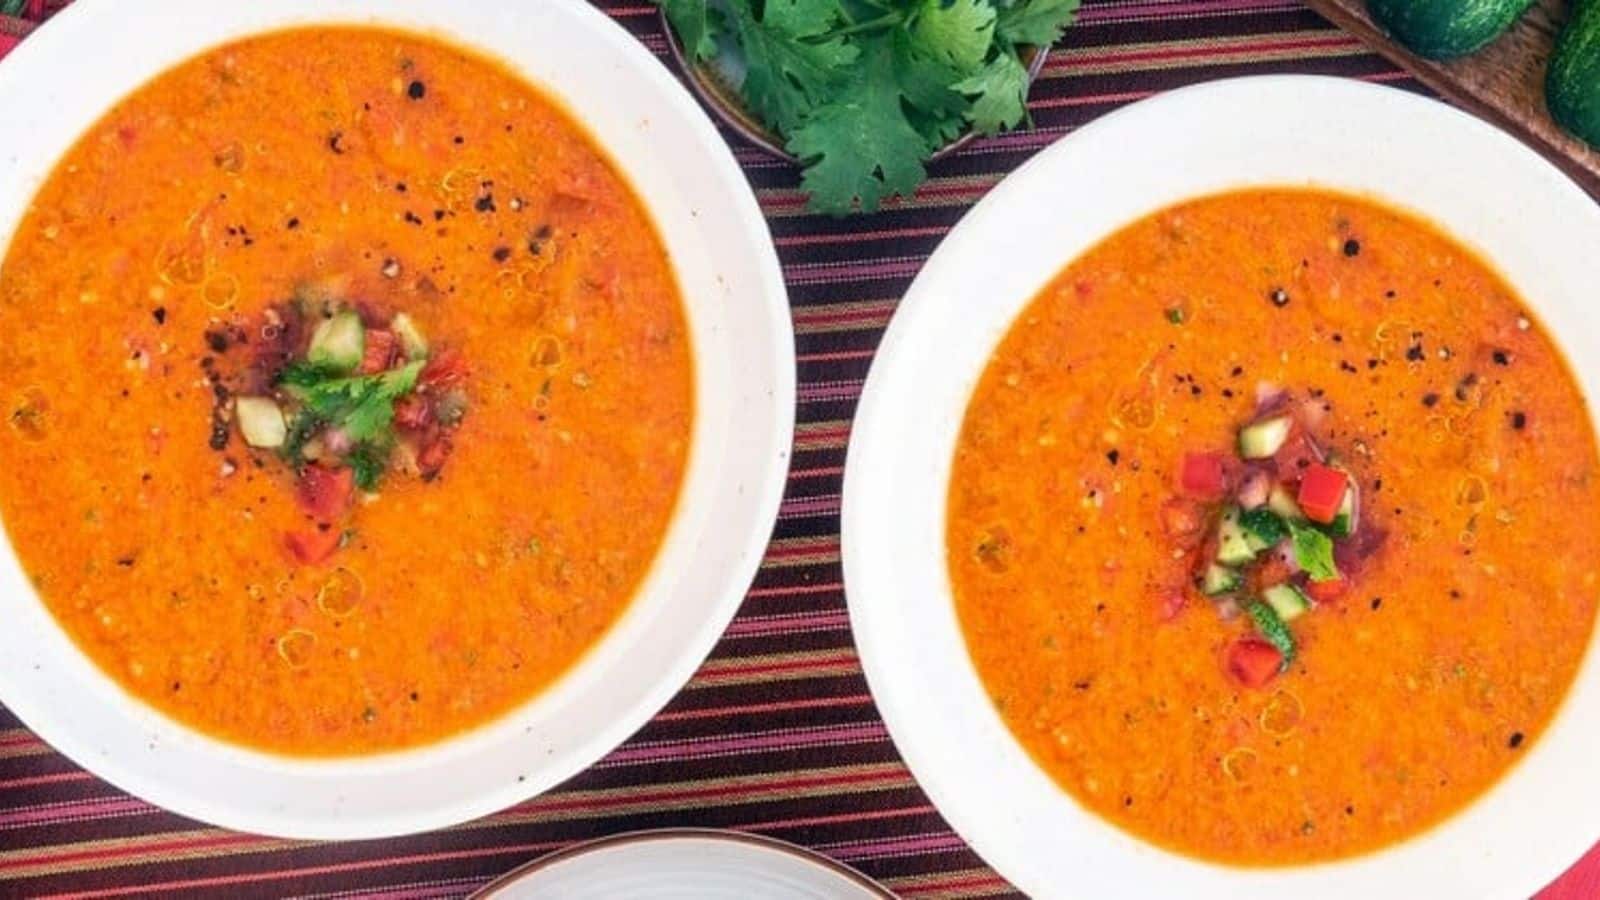 It's recipe time! Make authentic gazpacho andaluz at home